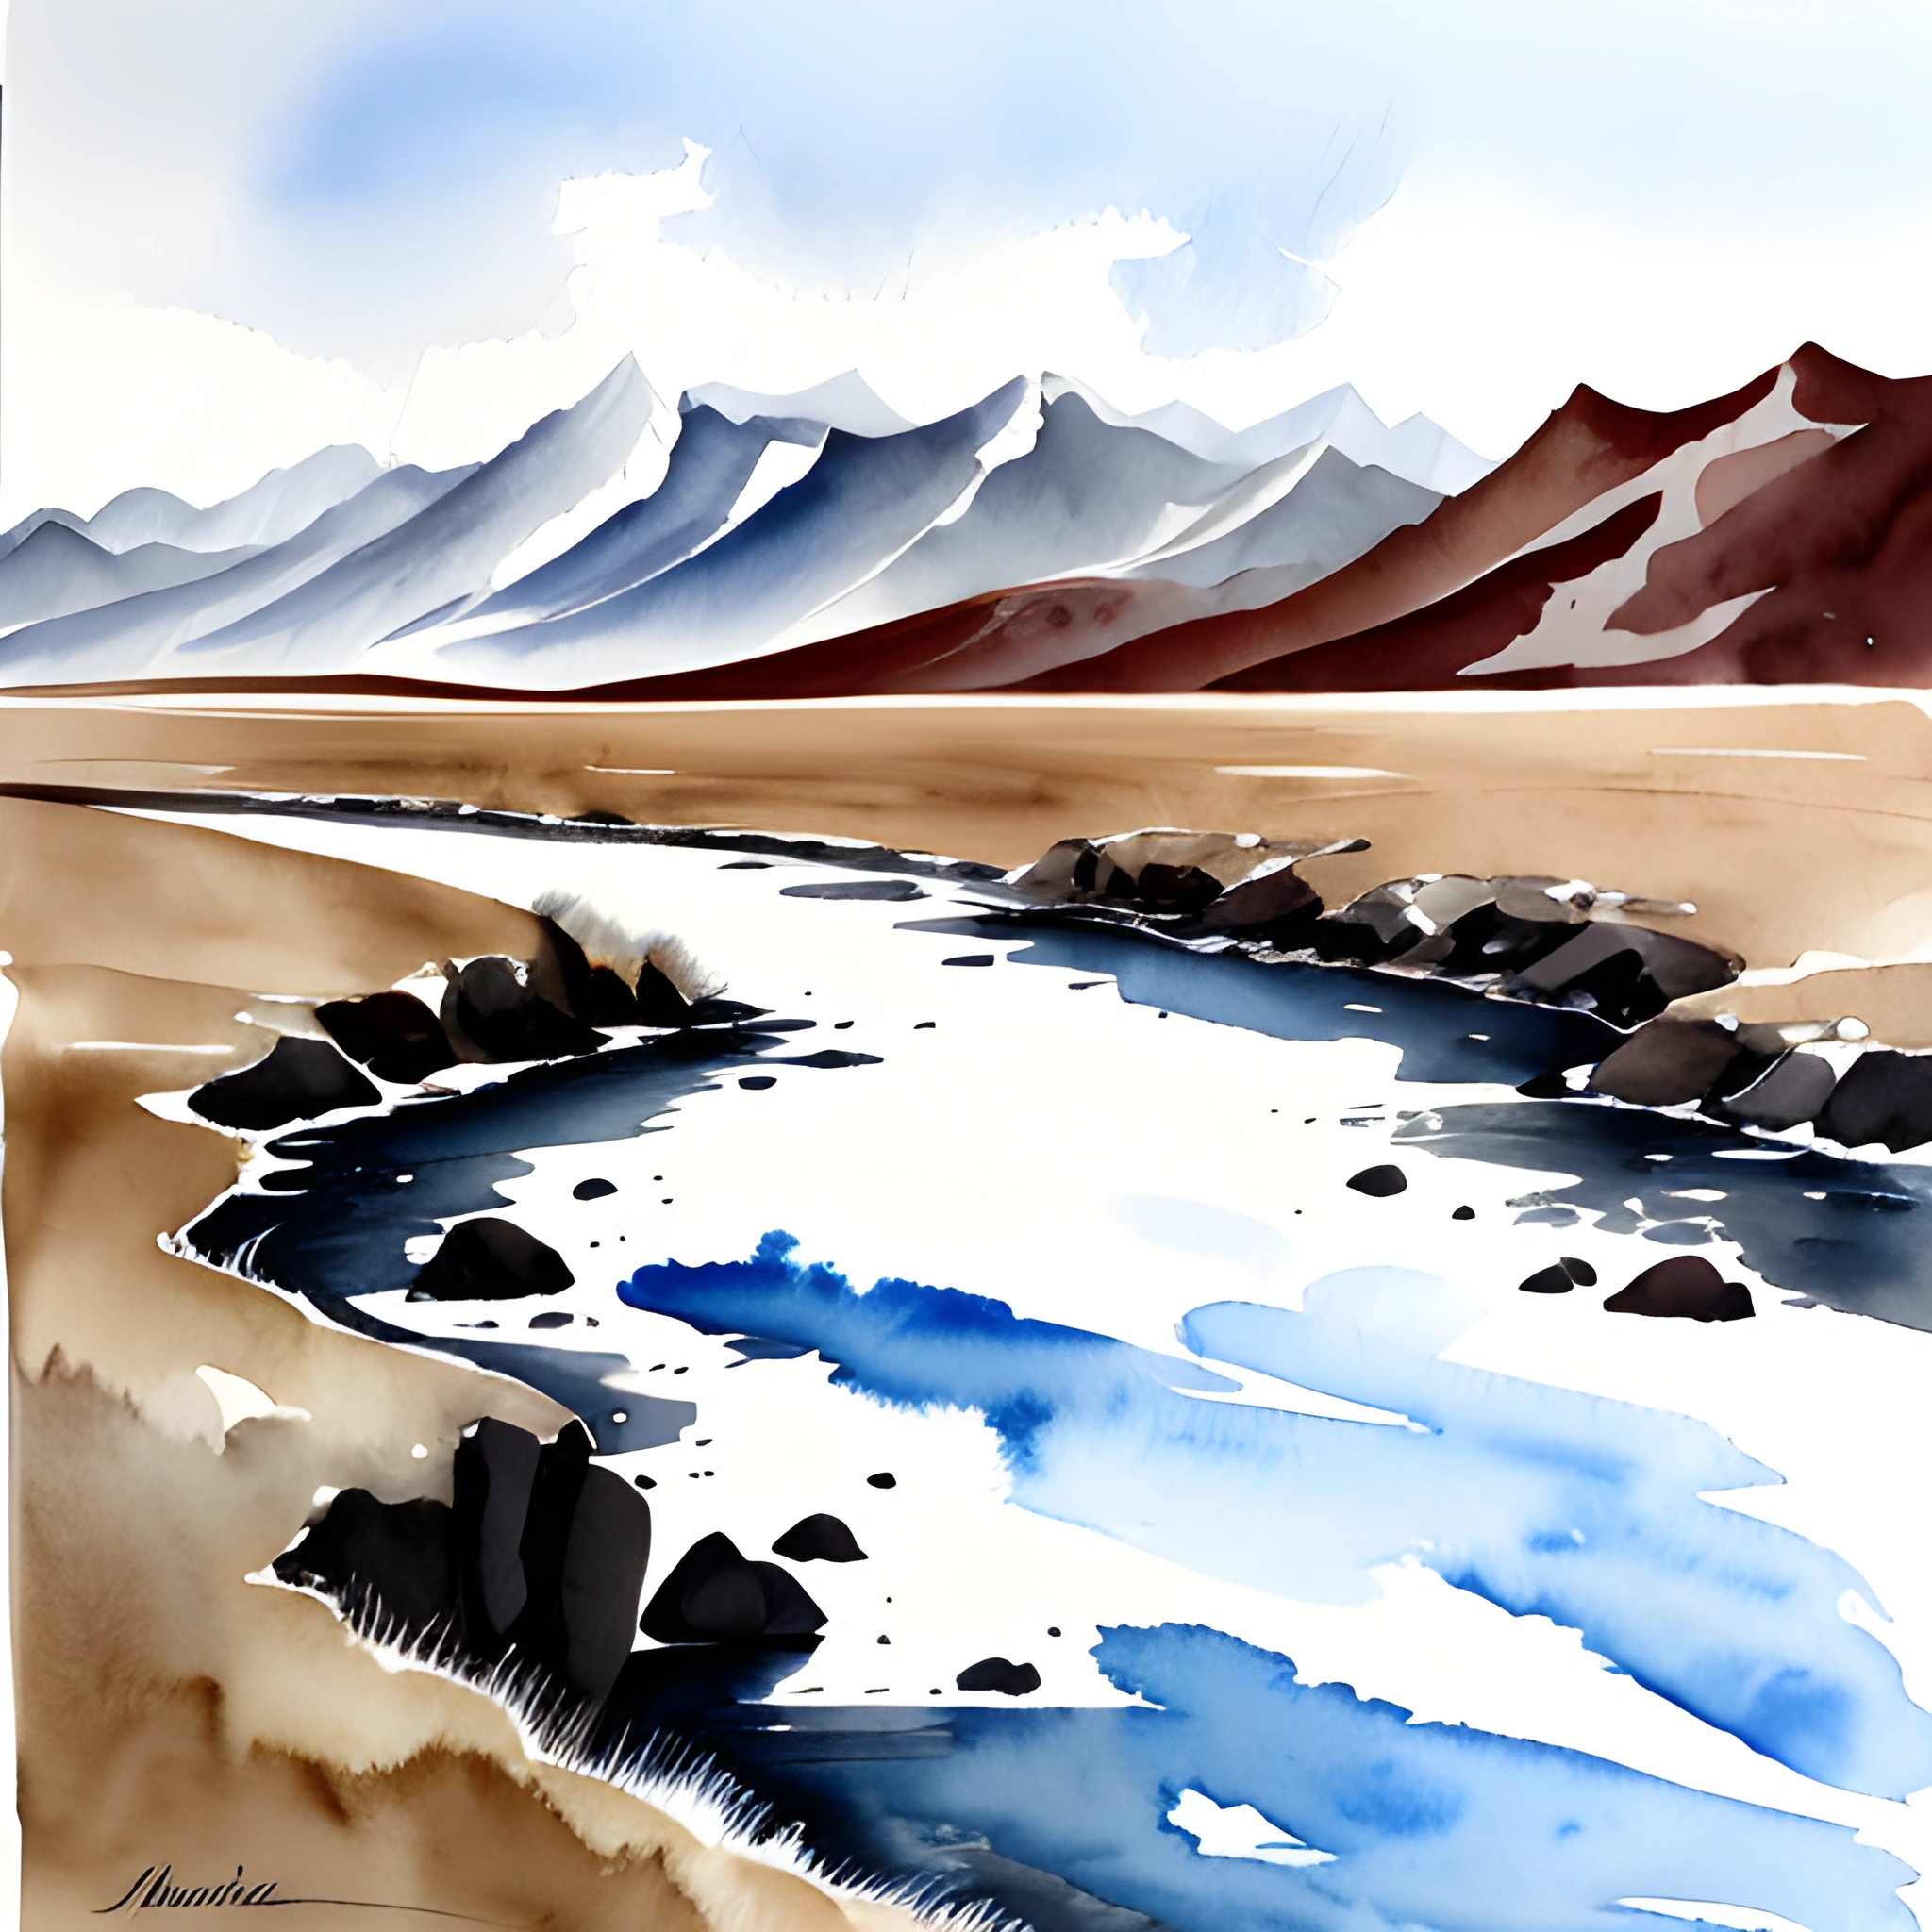 painting of a river running through a desert with mountains in the background